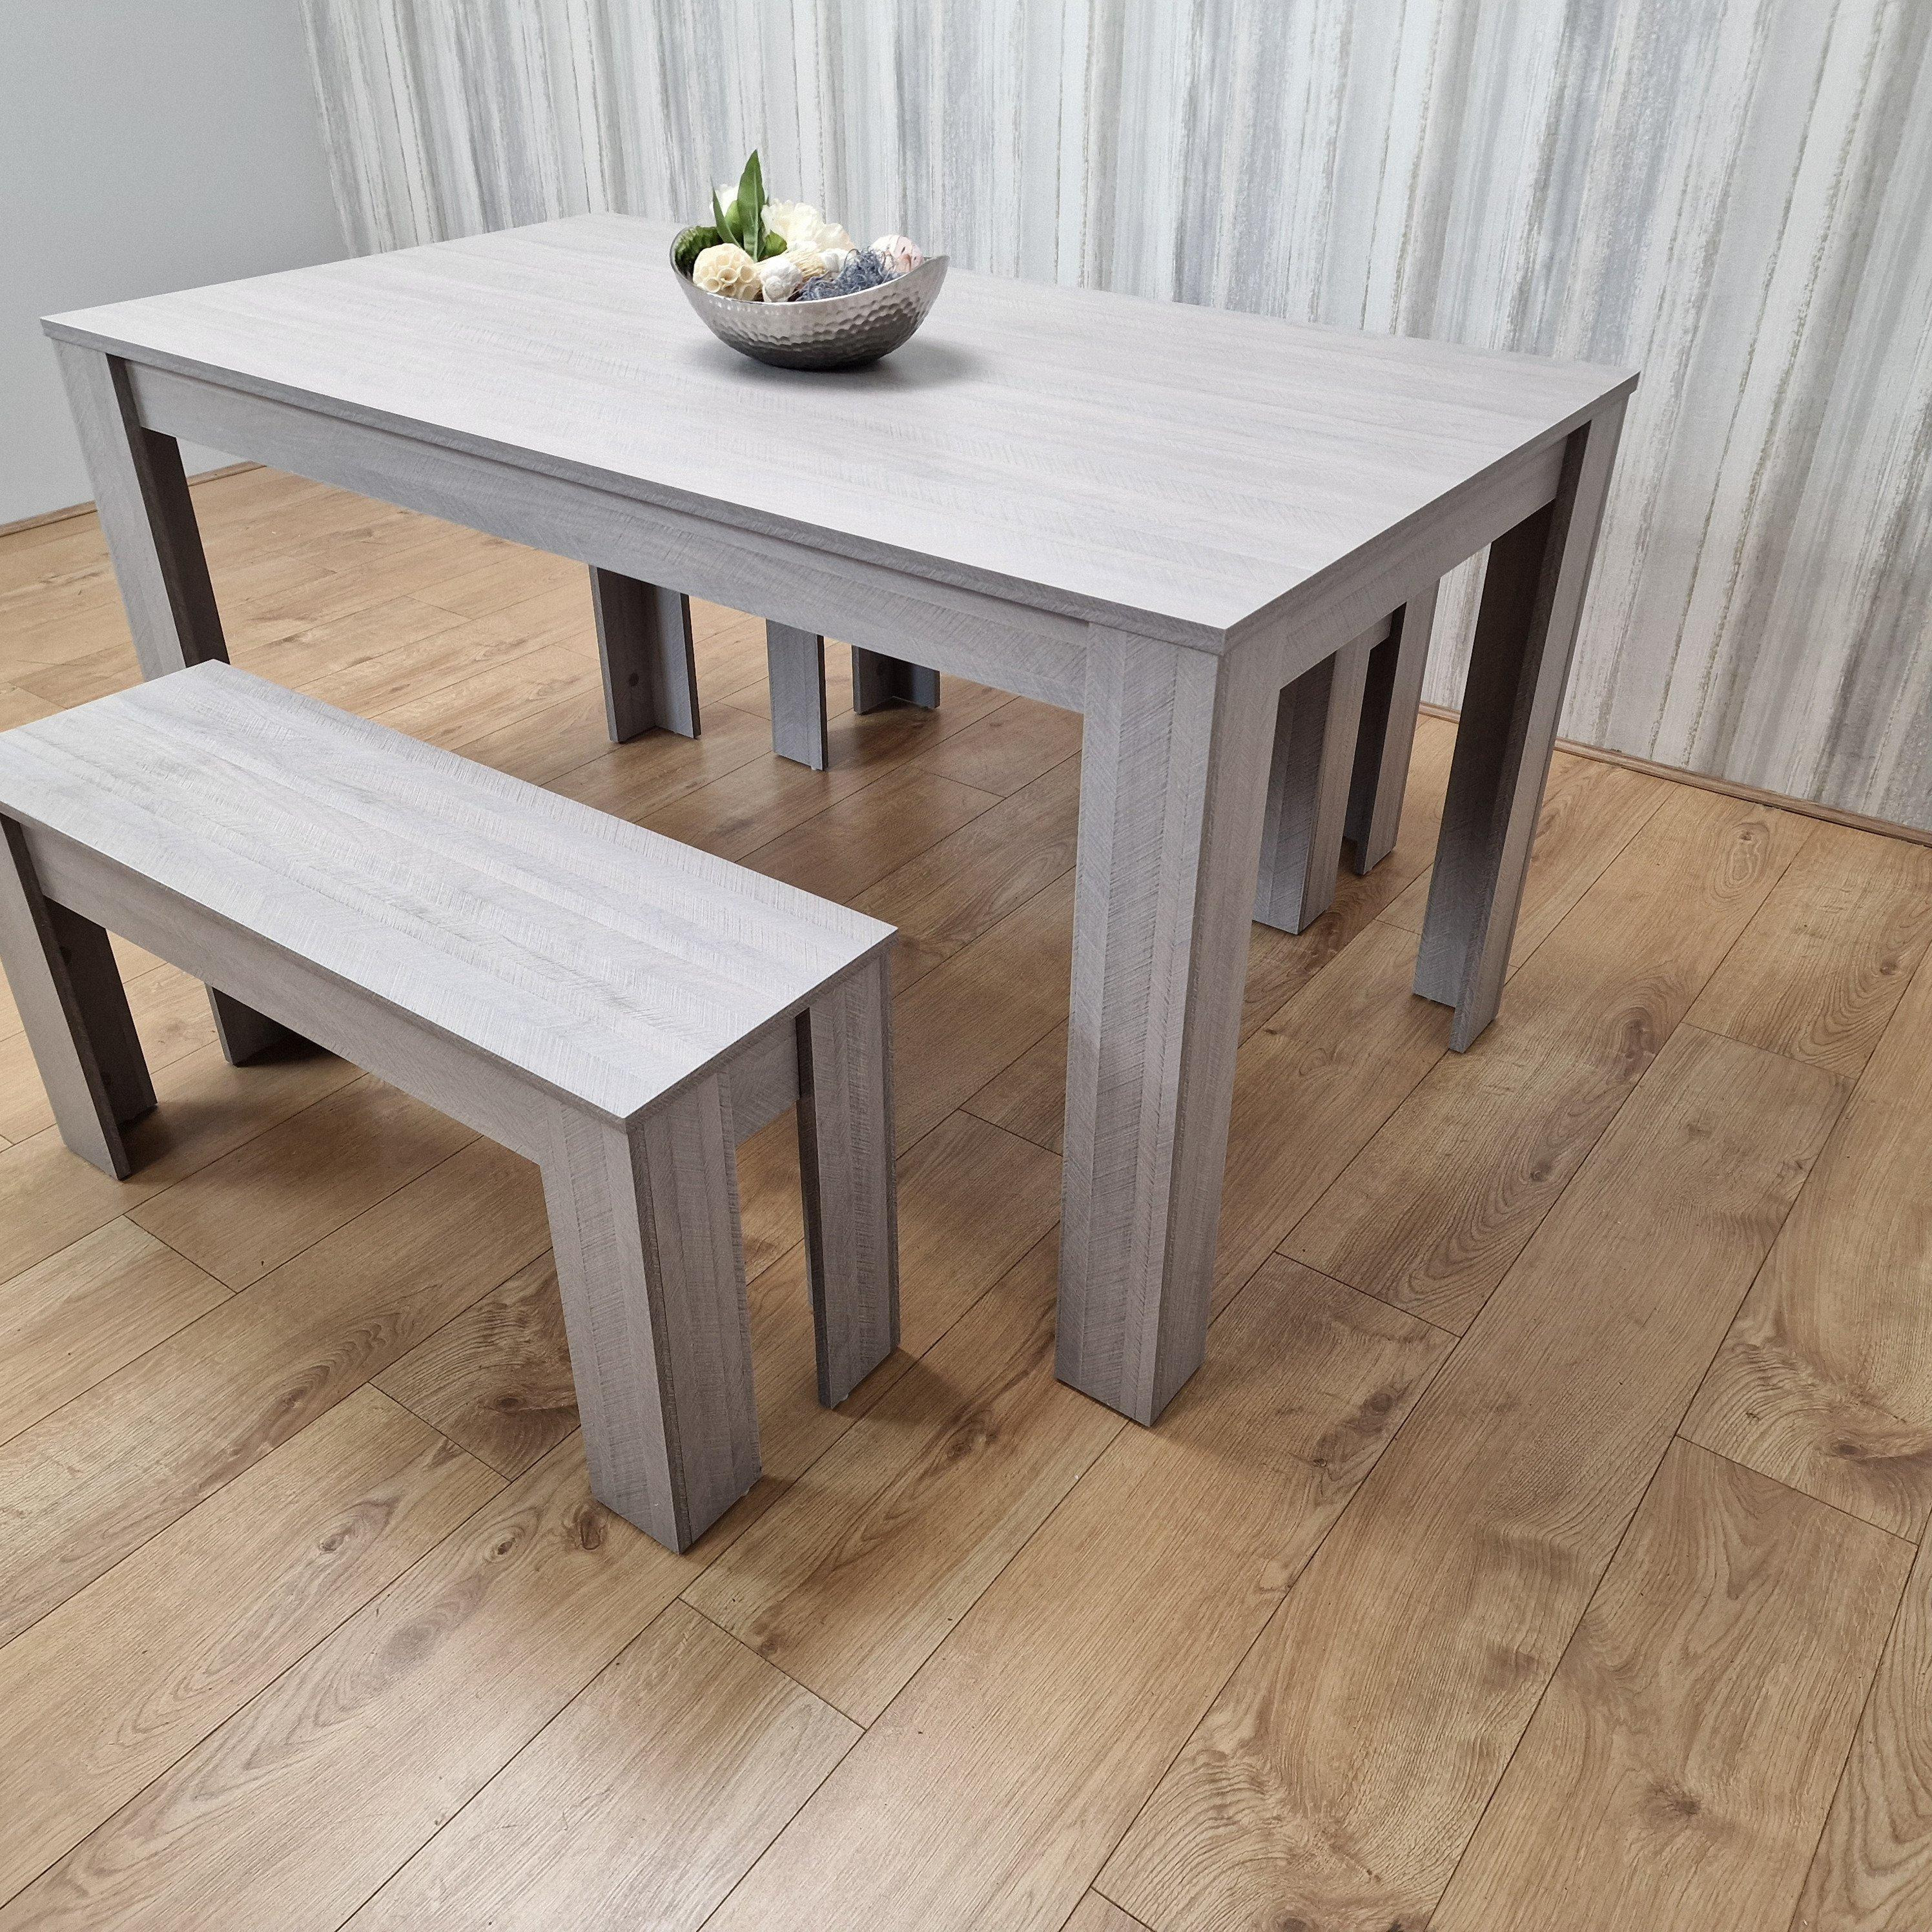 Kitchen Dining Table with 2 Benches,Dining room Table set, Dining Table and 2 Benches - image 1